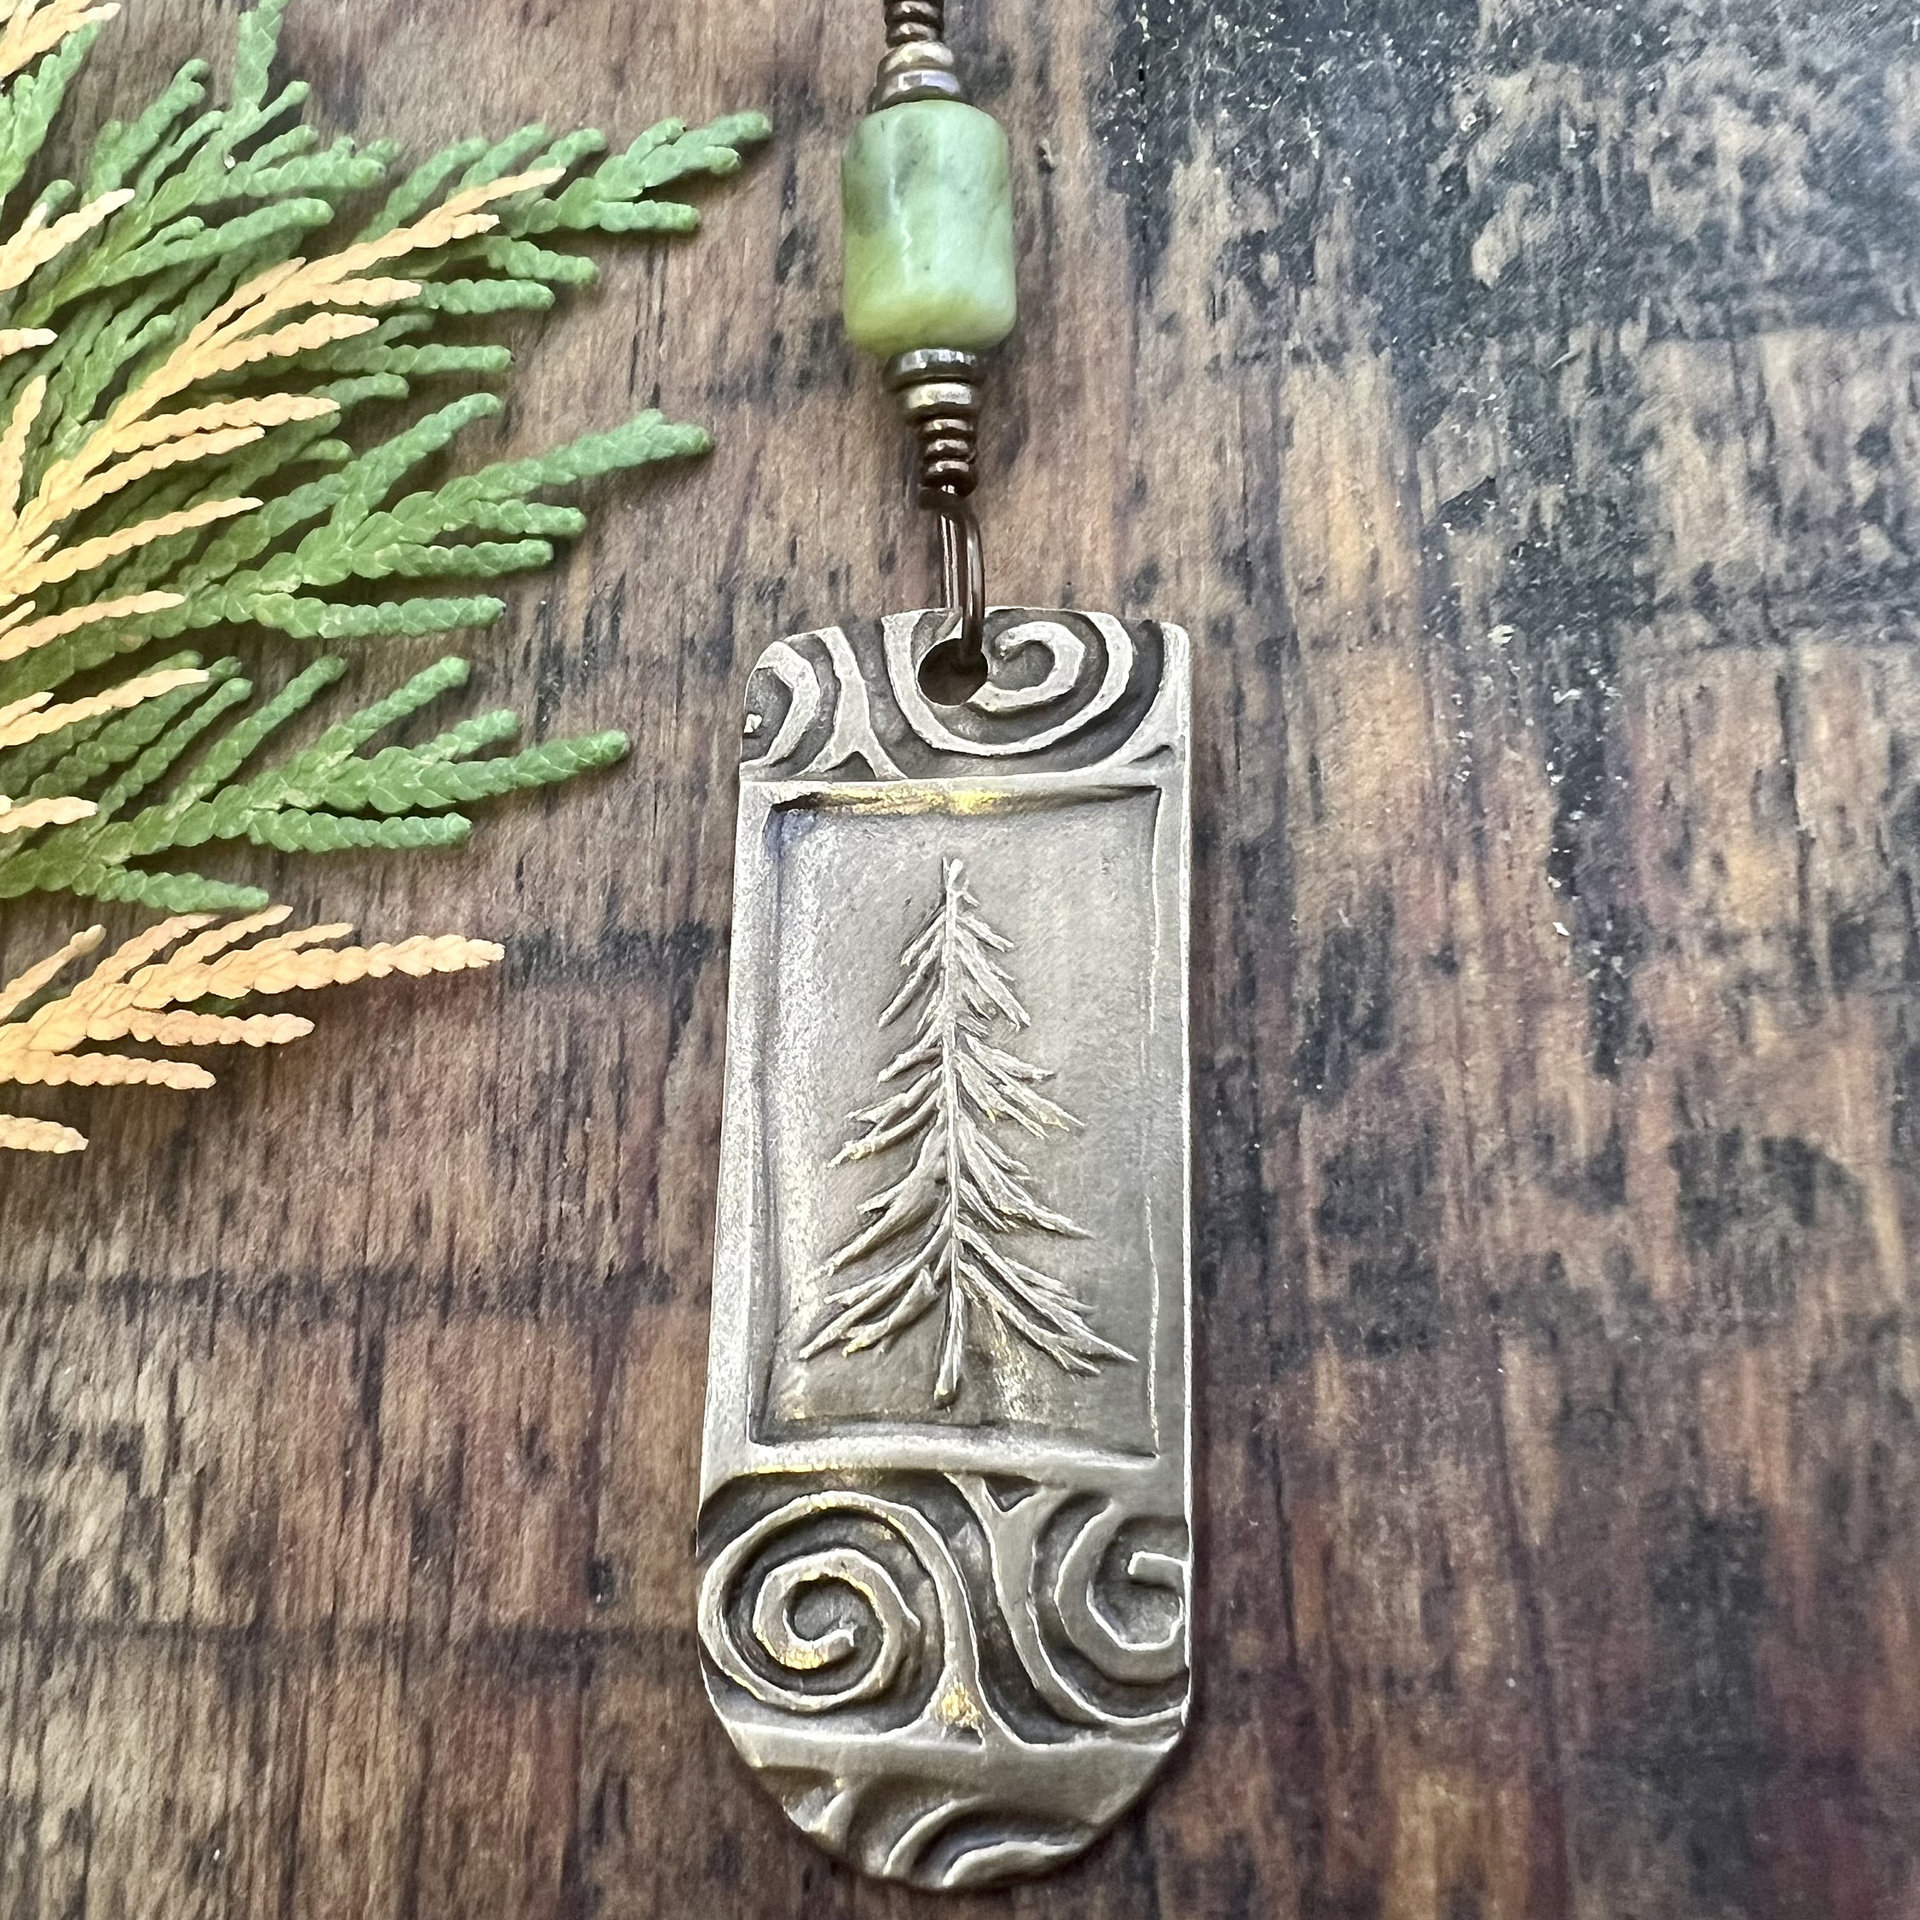 Pine Tree, Bronze Pendant, Celtic Spirals, Connemara Marble, Evergreen Trees, Earthy Rustic Art Jewelry, Hand Carved, Tree of Life, Pagan